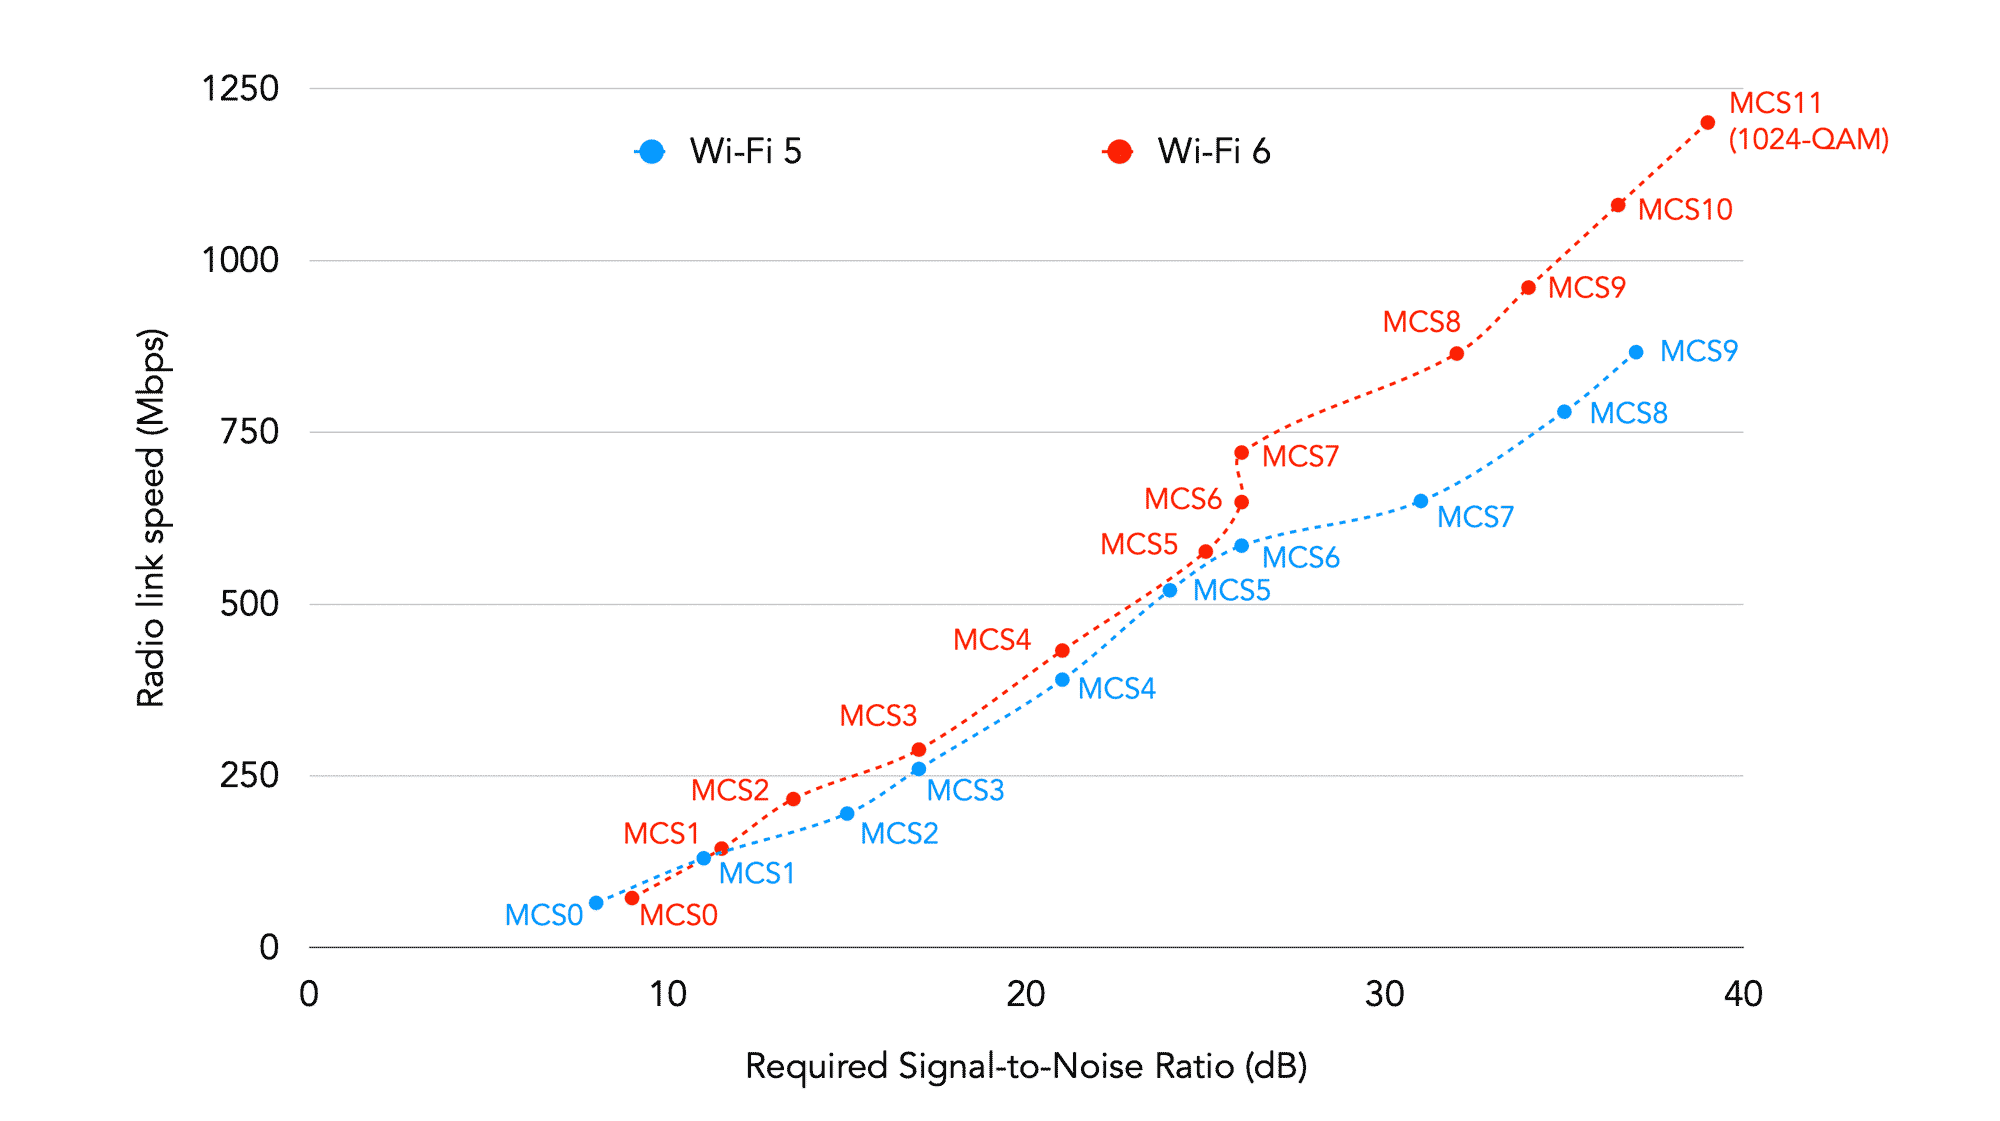 Speeds for Wi-Fi 5 and Wi-Fi 6